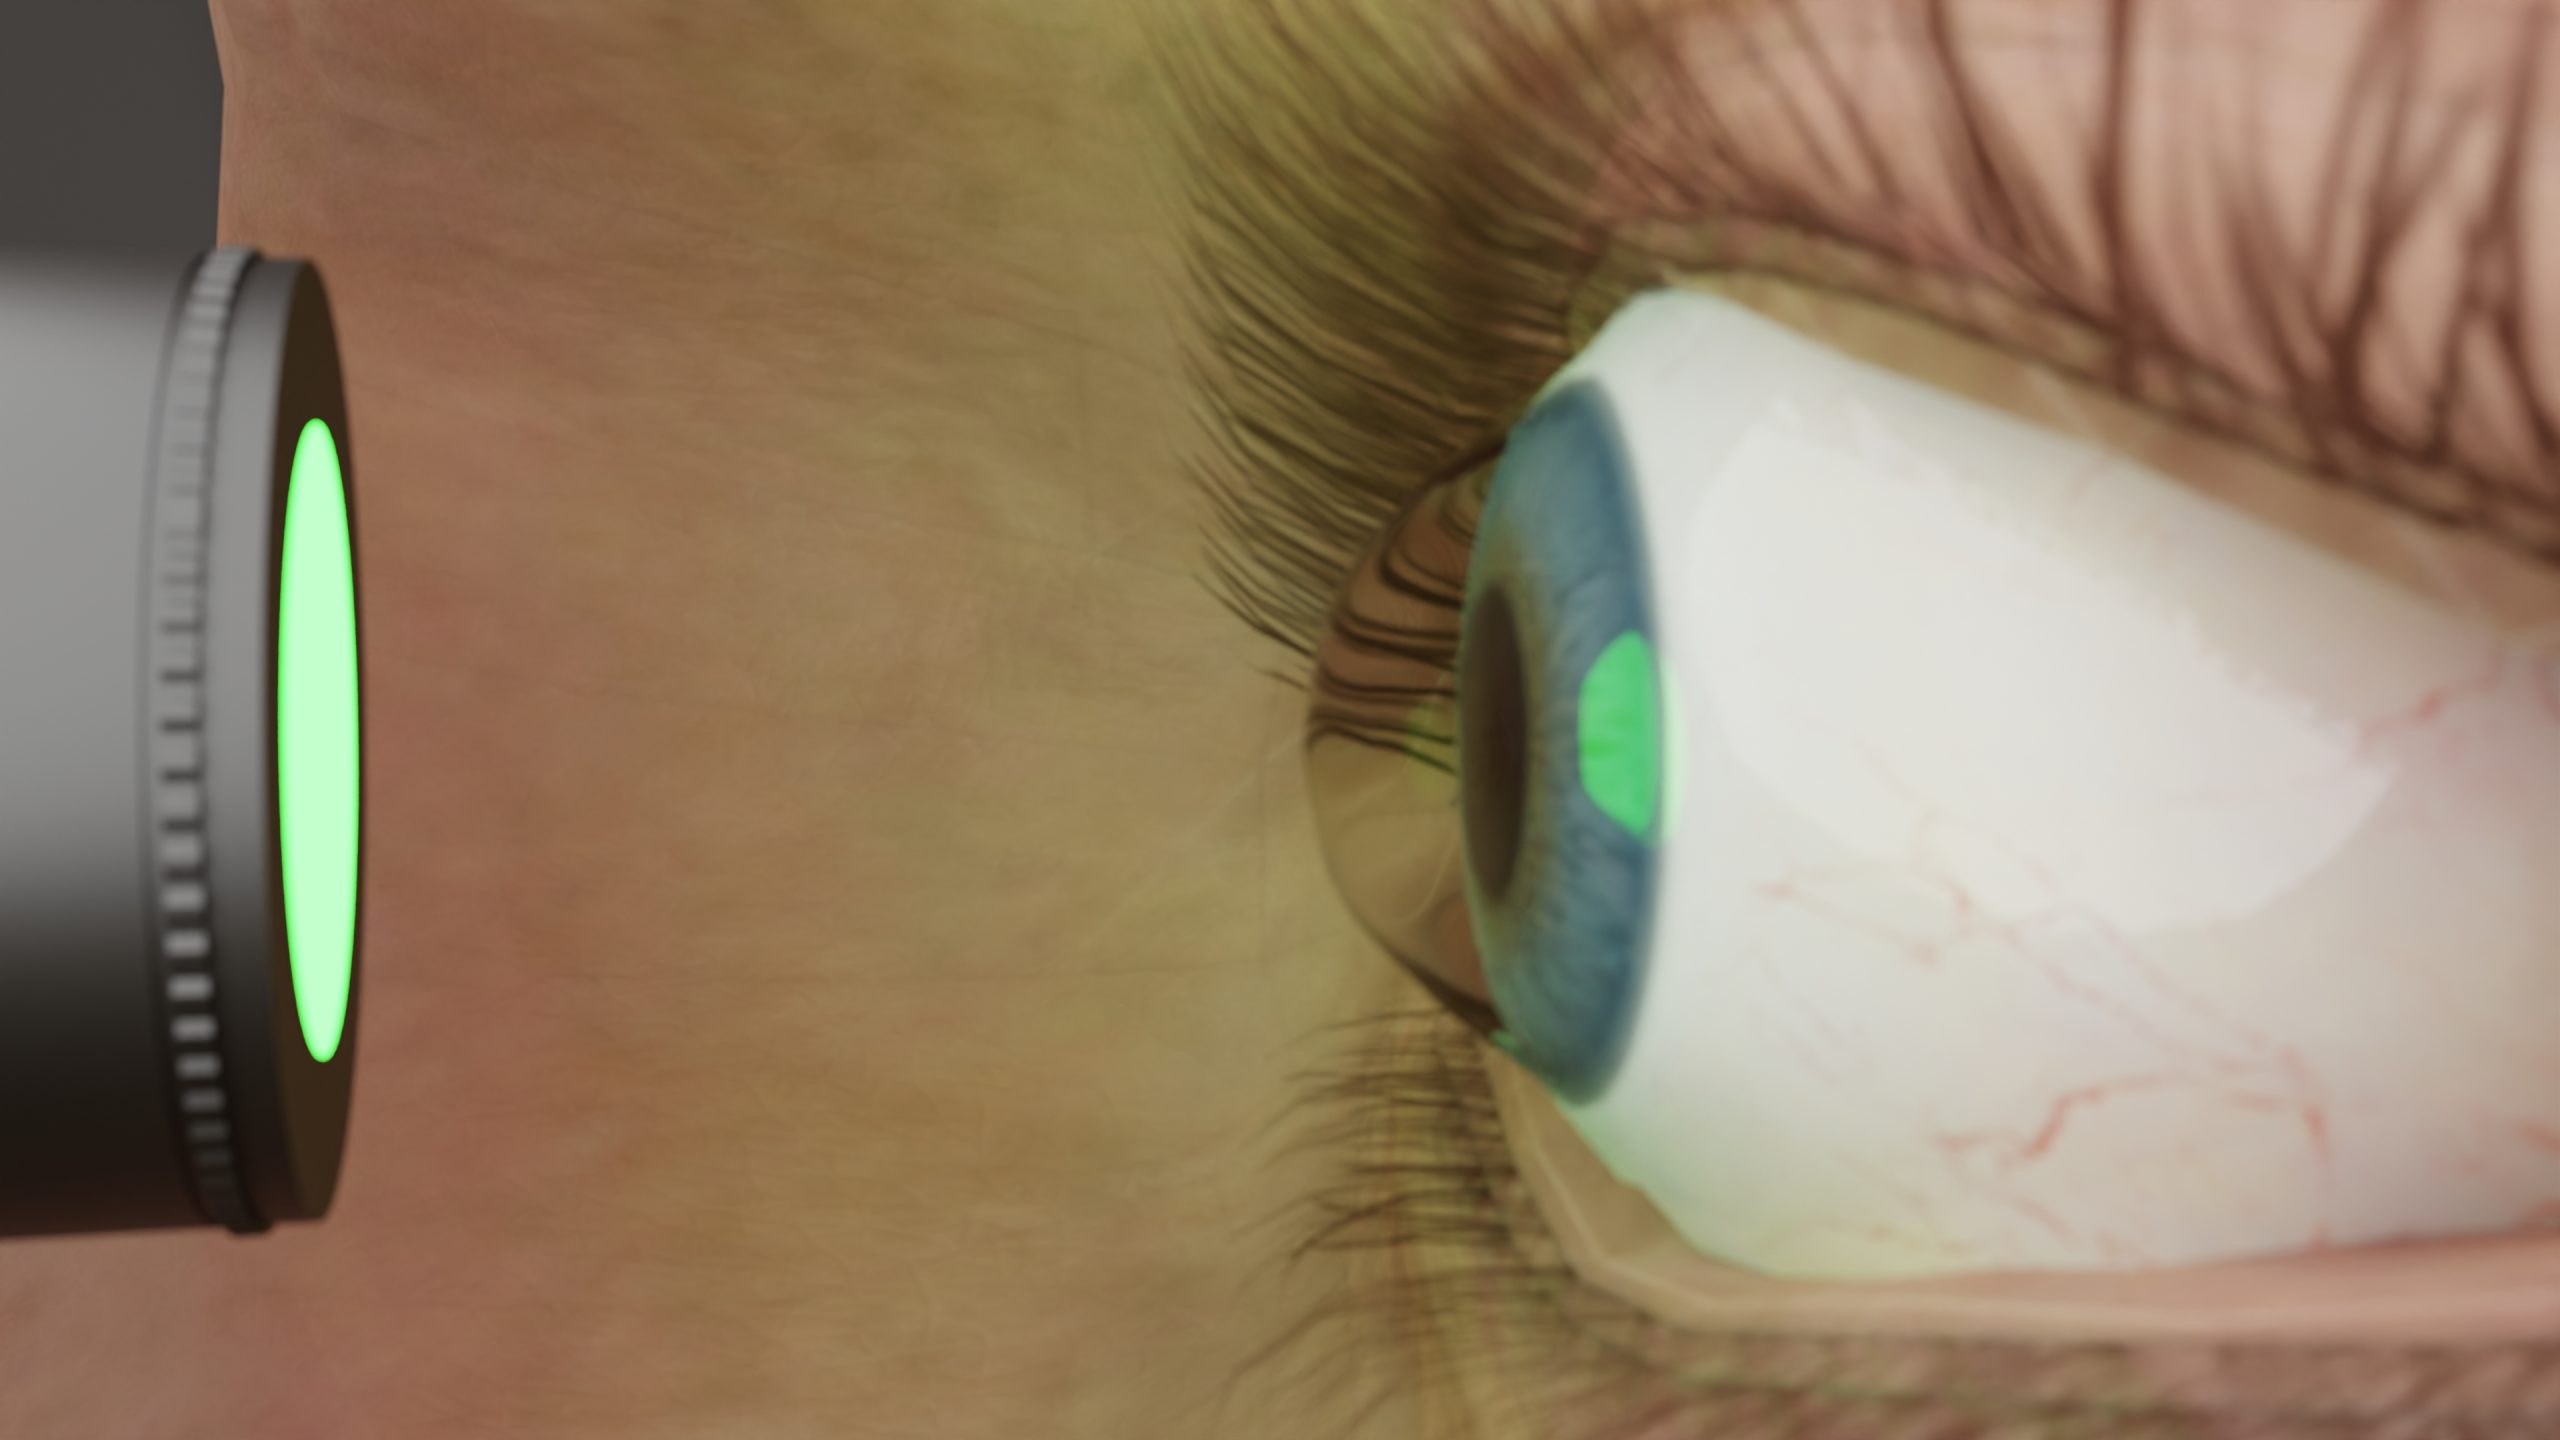 Exploring Femtosecond Laser Assisted Cataract Surgery (FLACS)